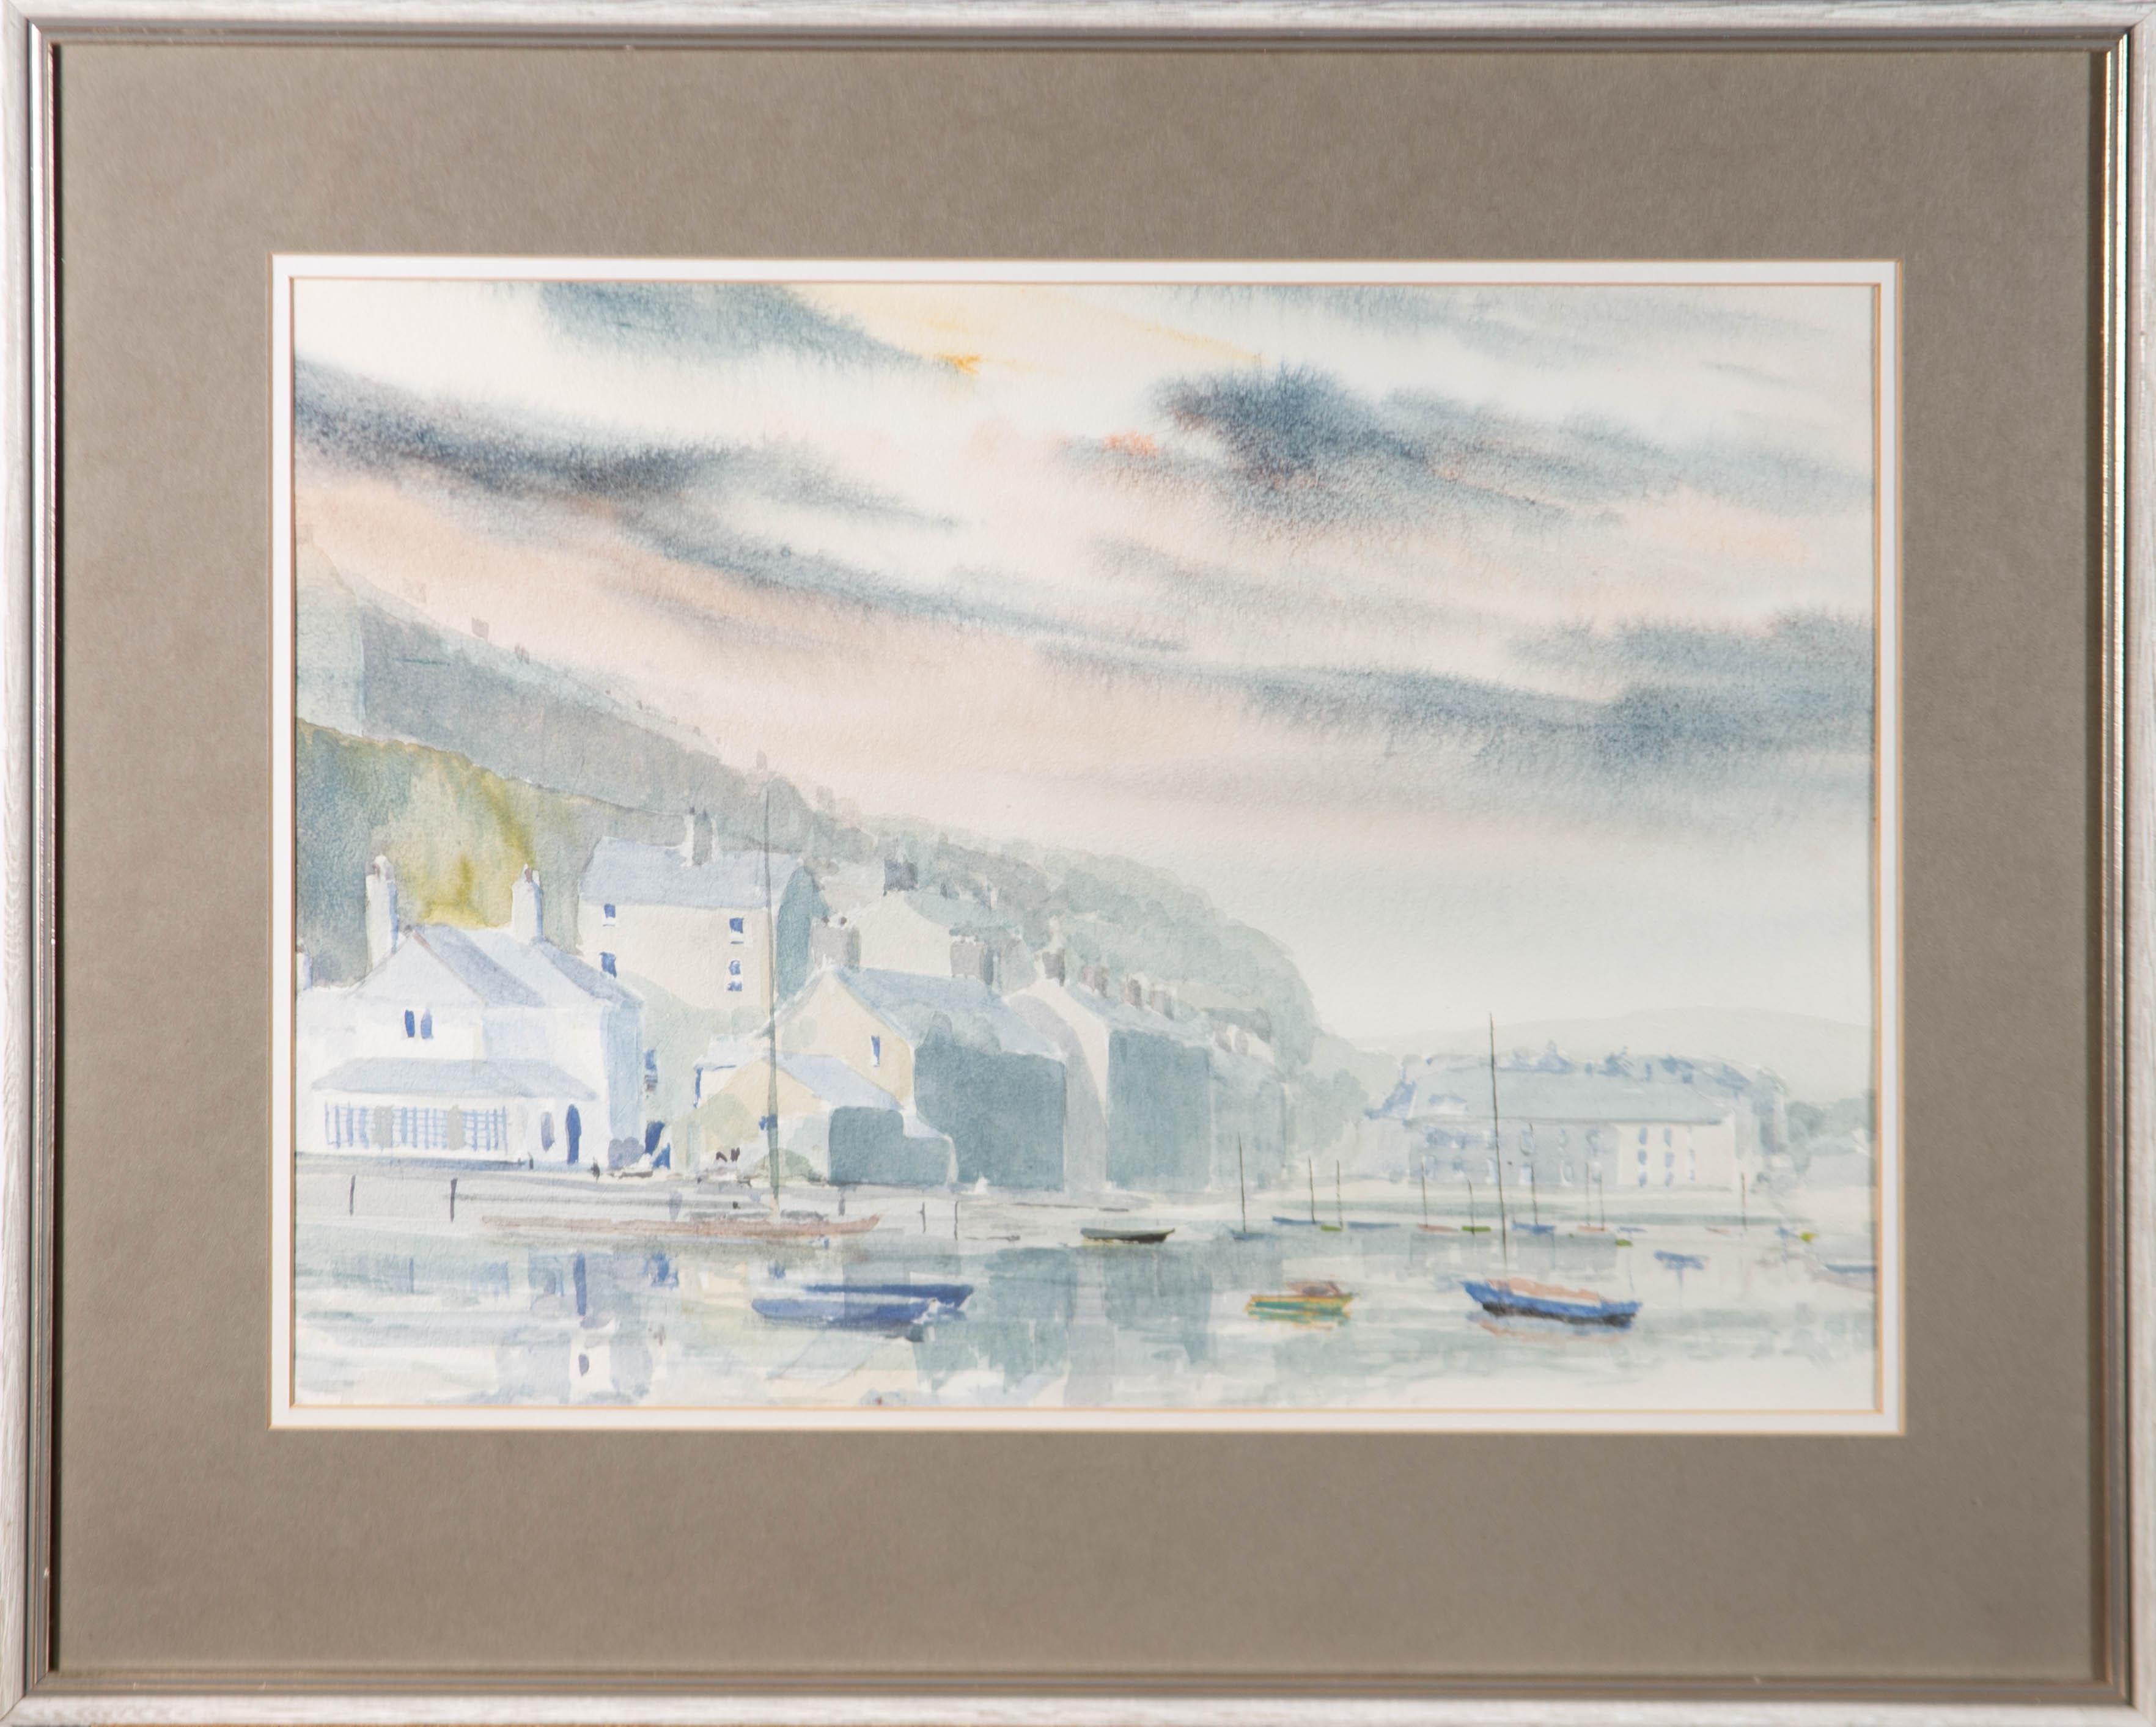 A captivating watercolour painting by J.K. Roberts, depicting a scene at Porthmadog Harbour, a Welsh coastal town and community in the Eifionydd area of Gwynedd. Signed and dated 'blind' to the lower right-hand corner. Location inscribed 'blind' to